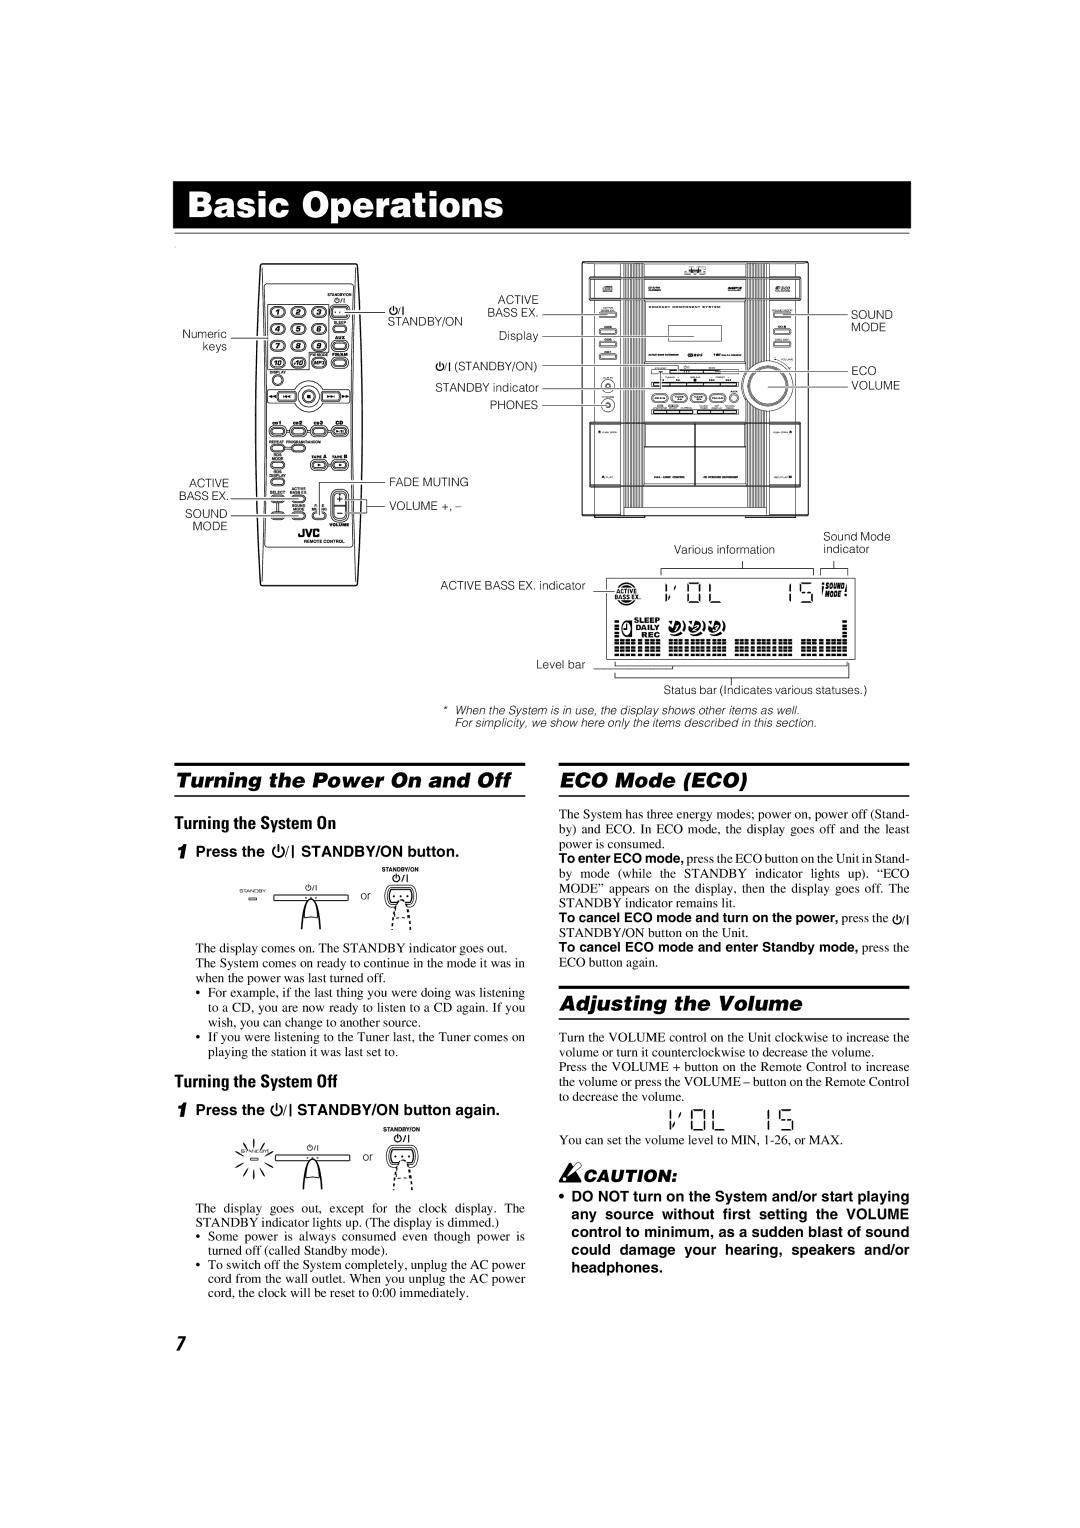 JVC LVT1346-002A manual Basic Operations, Turning the Power On and Off, ECO Mode ECO, Adjusting the Volume 